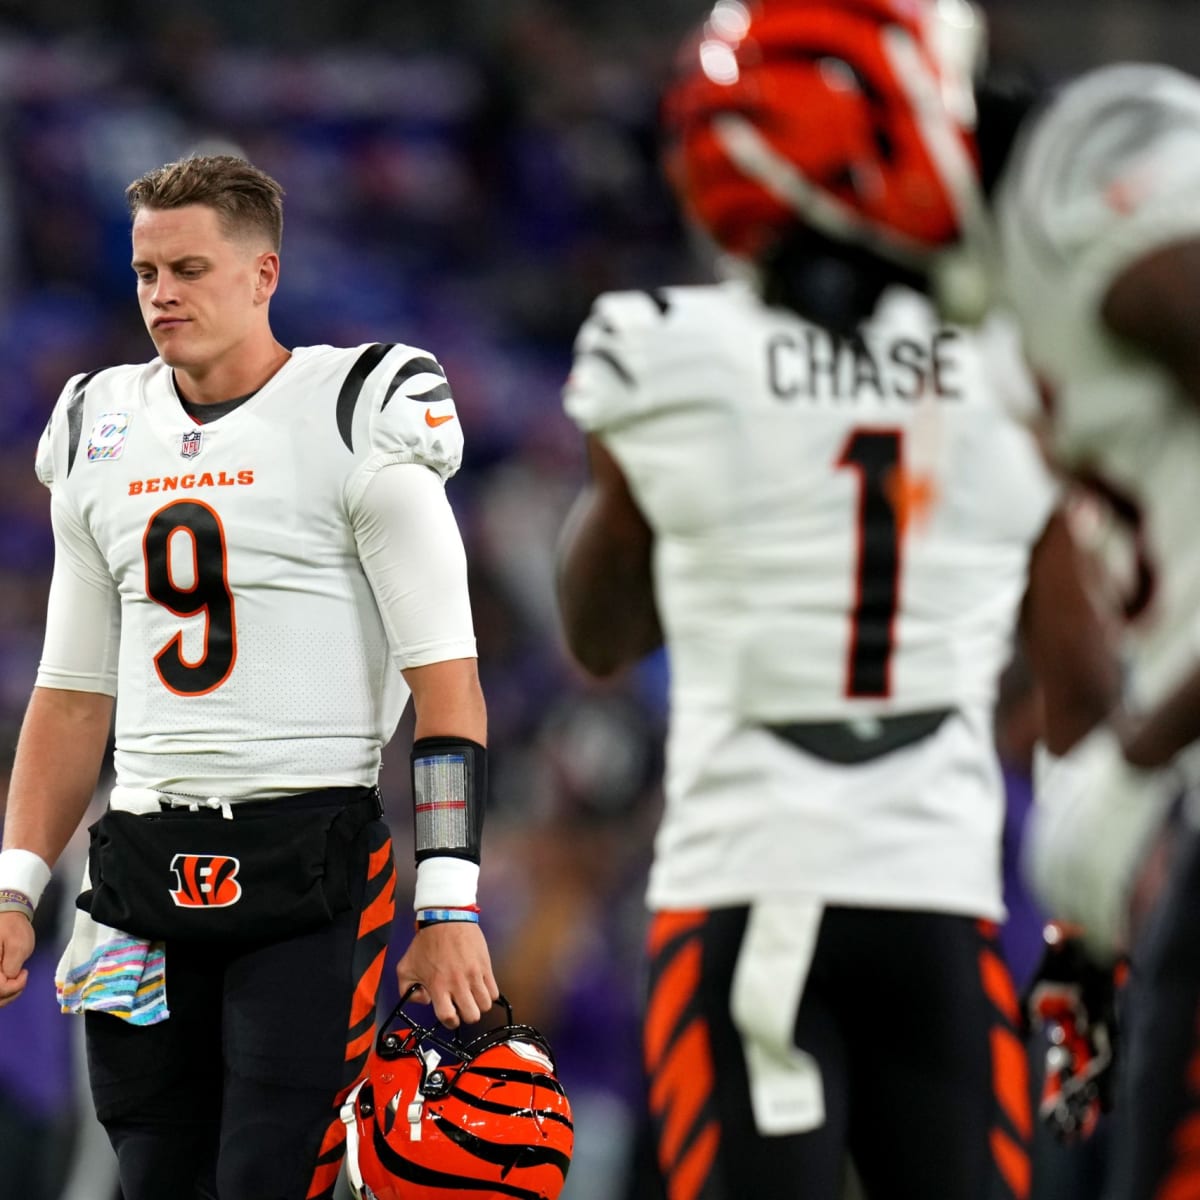 Bengals Have Been Scr*wed : Cincinnati Up In Arms After NFL Proposes Coin  Flip As a Resolution Technique - The SportsRush